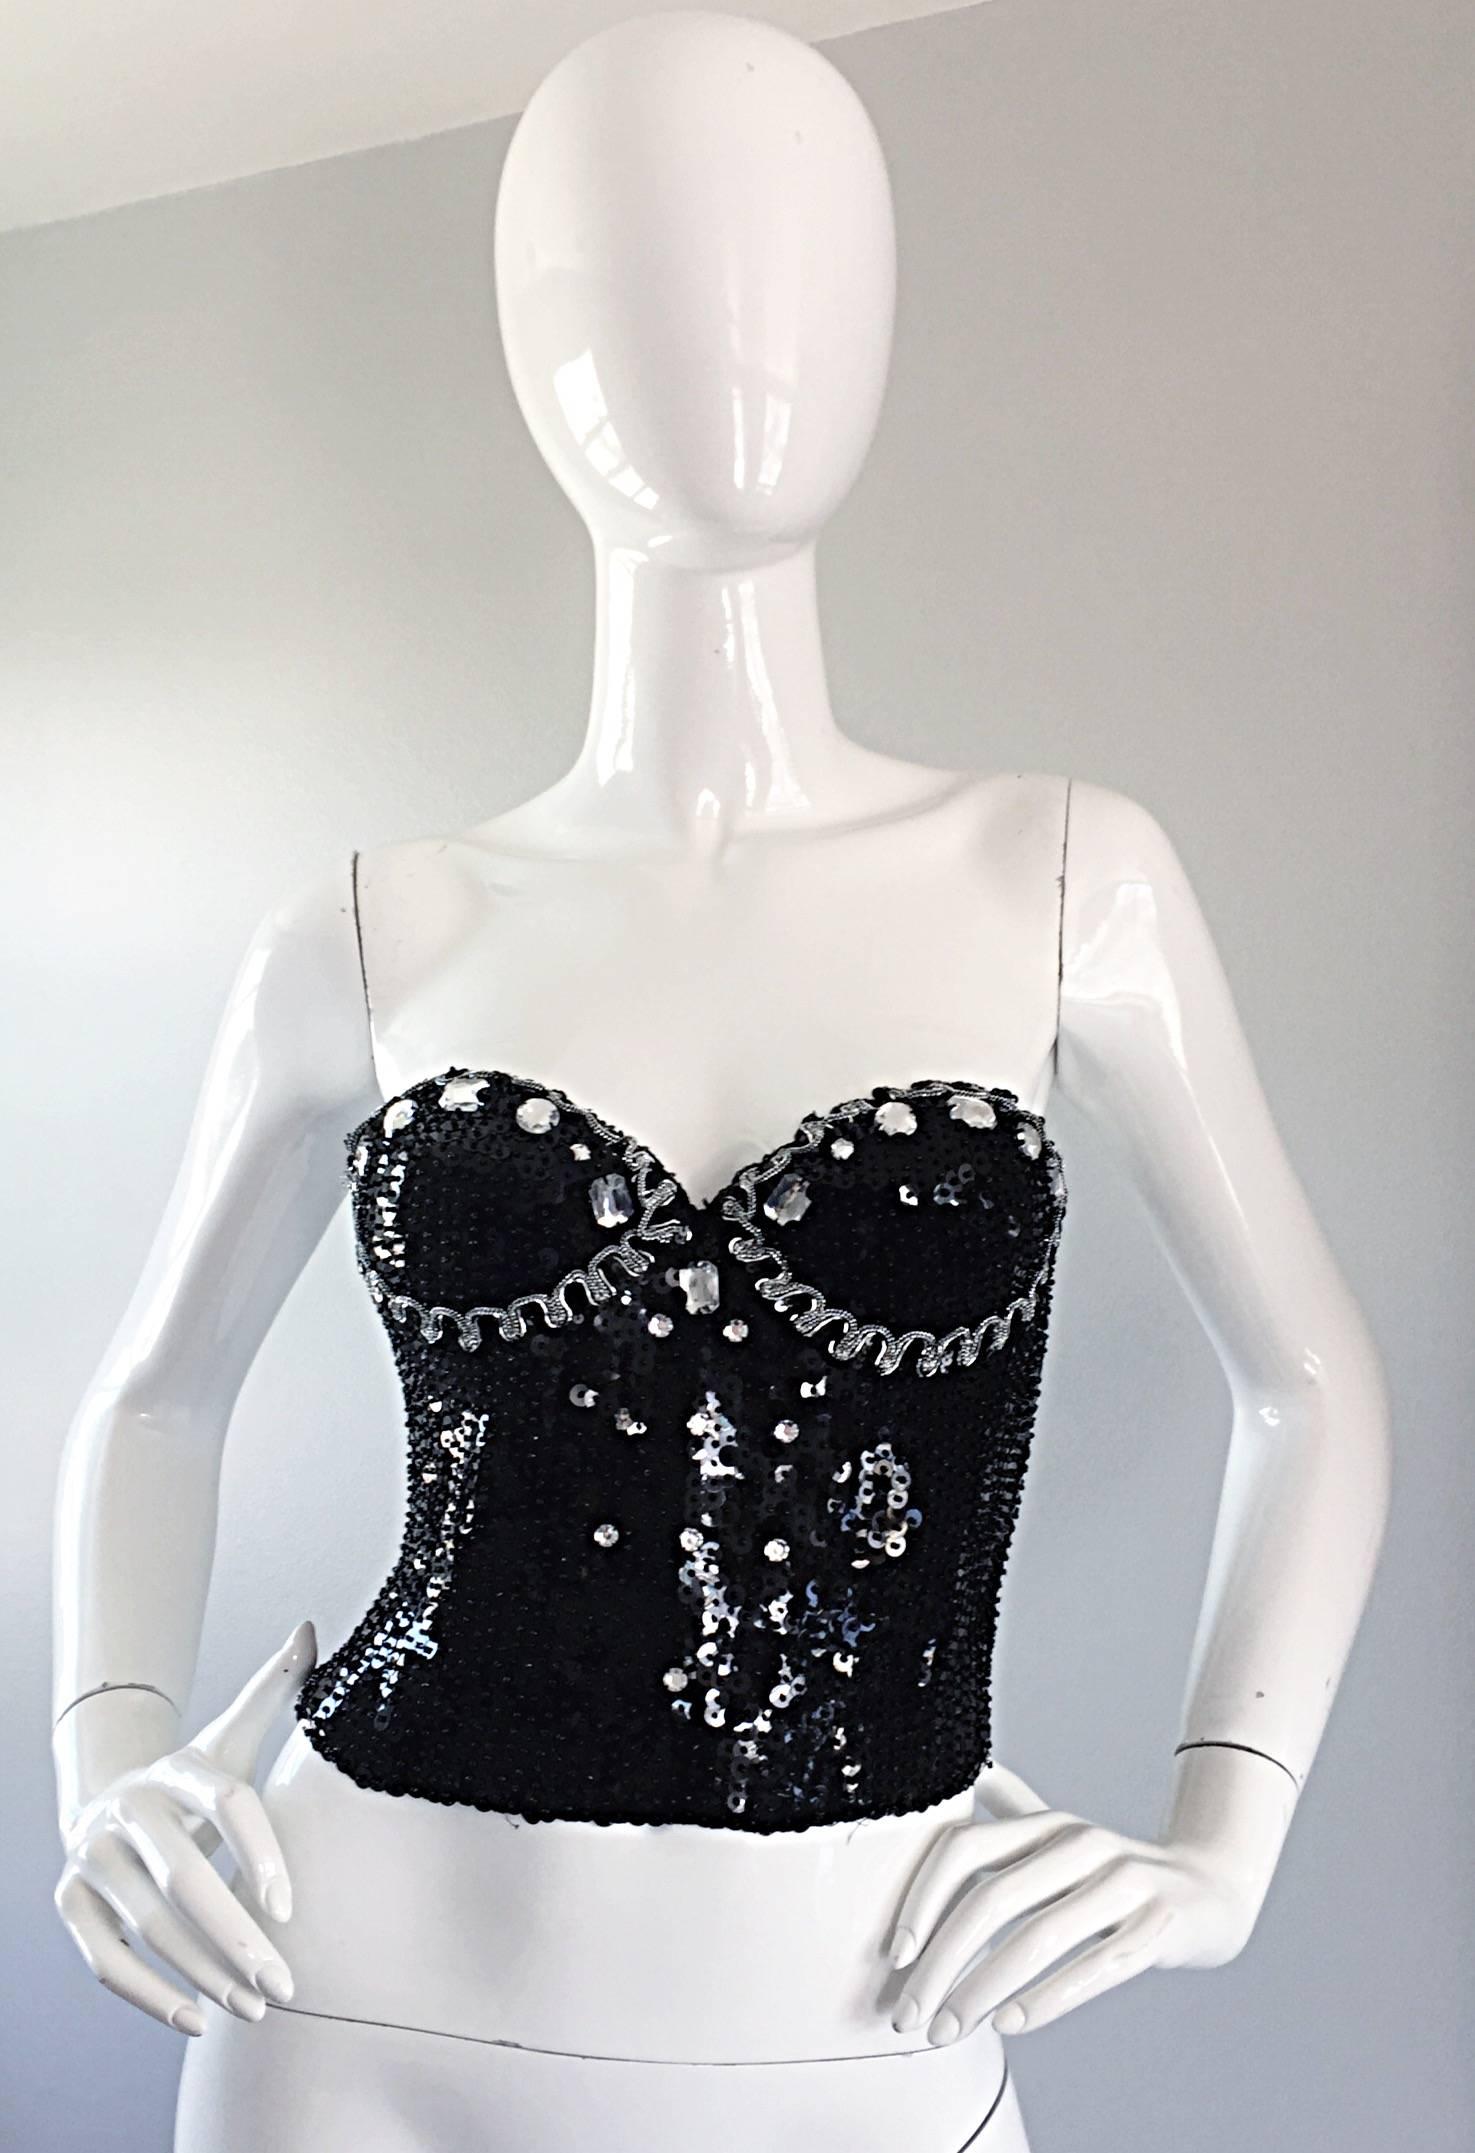 Sexy vintage DANA DEATHERAGE black corset / crop top! Features hundres of hand-sewn sequins, beads, rhinestones and crystals. Silver metallic trim at bust. Two rows of hook-and-eye closures will adjust to fit. Great with a high waisted leather